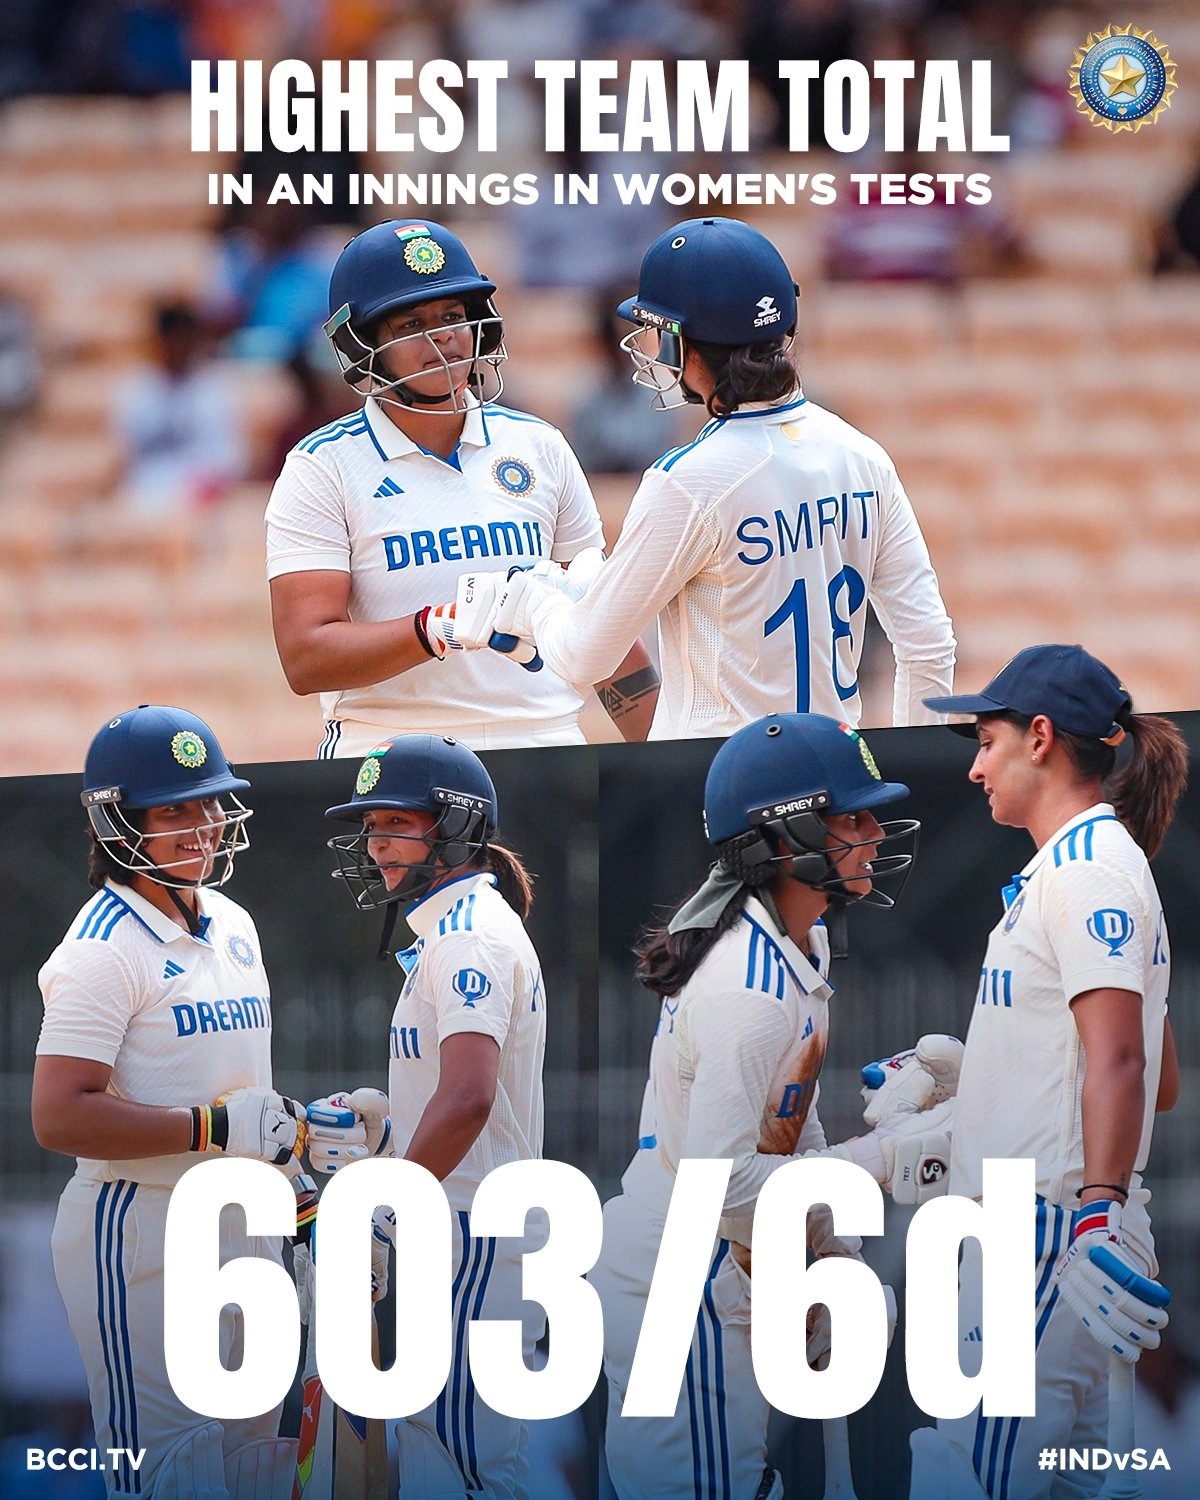 Much of the credit for the feat goes to Indian openers -- Shafali Verma (205) and Smriti Mandhana (149) -- who shared a stand of 292 -- the highest opening partnership in women's cricket.